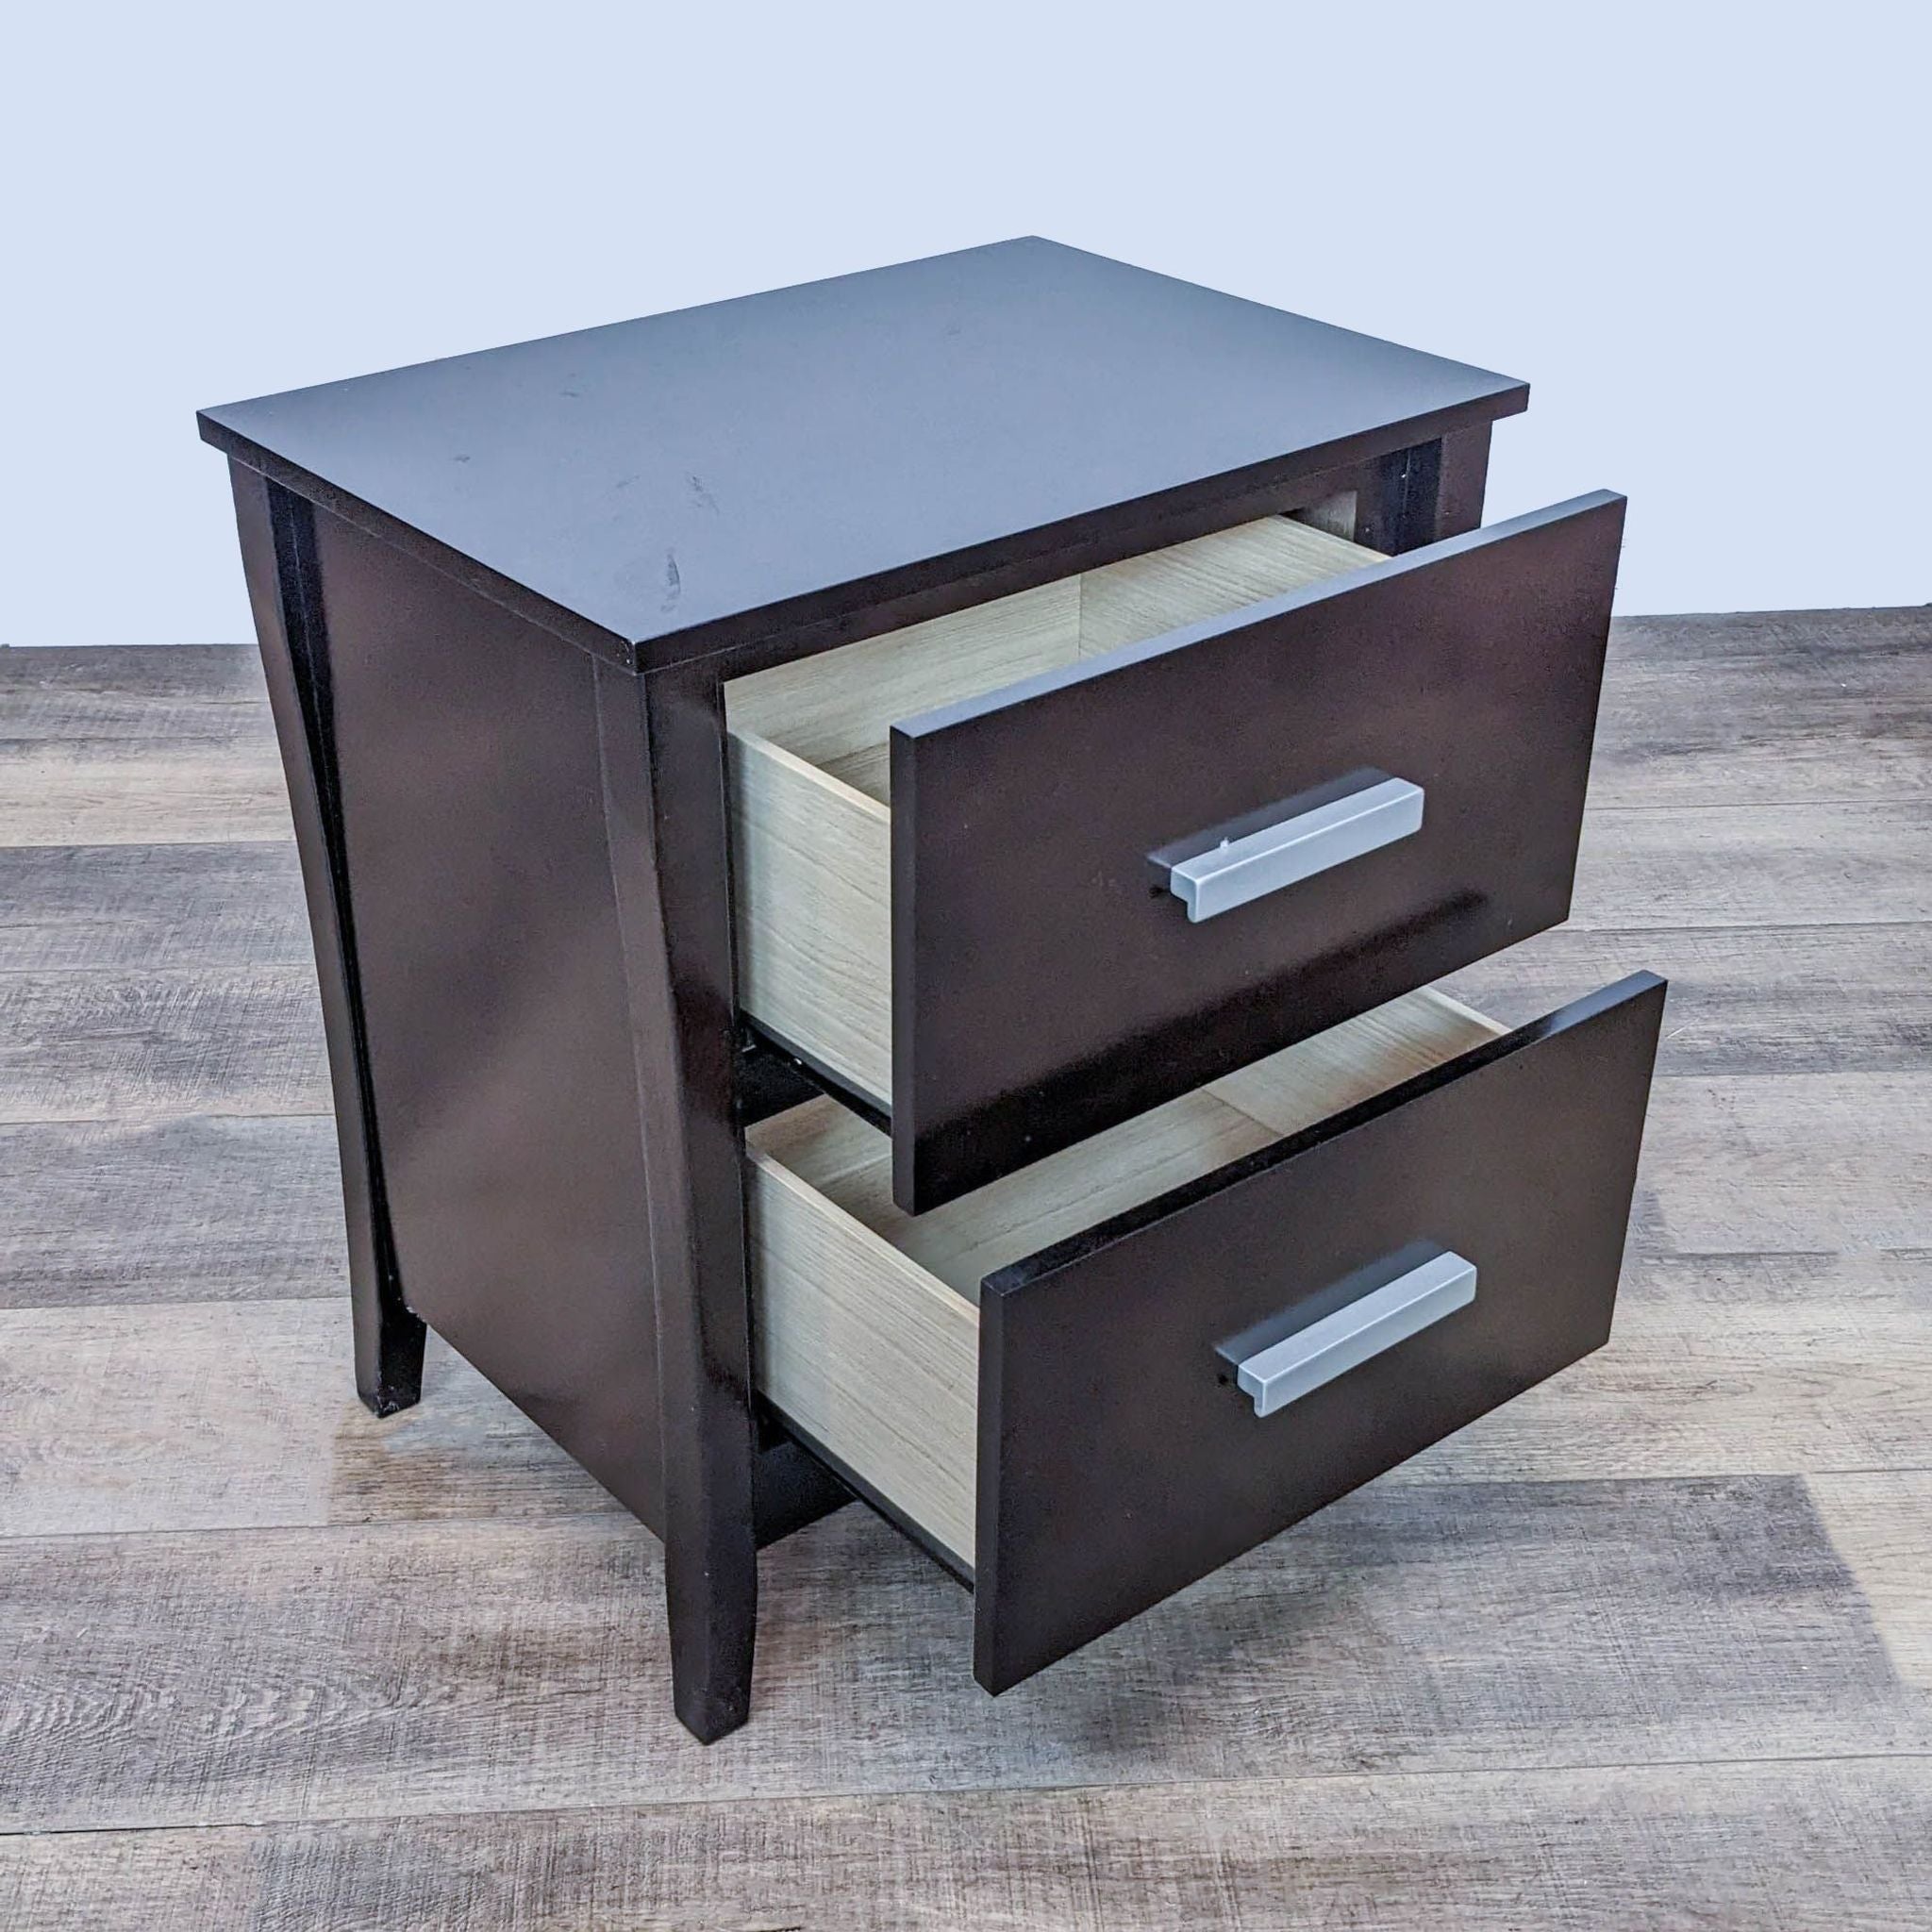 Alt text 2: Open-drawer angle of Coaster Fine Furniture end table, revealing maple veneers, in dark cappuccino finish.